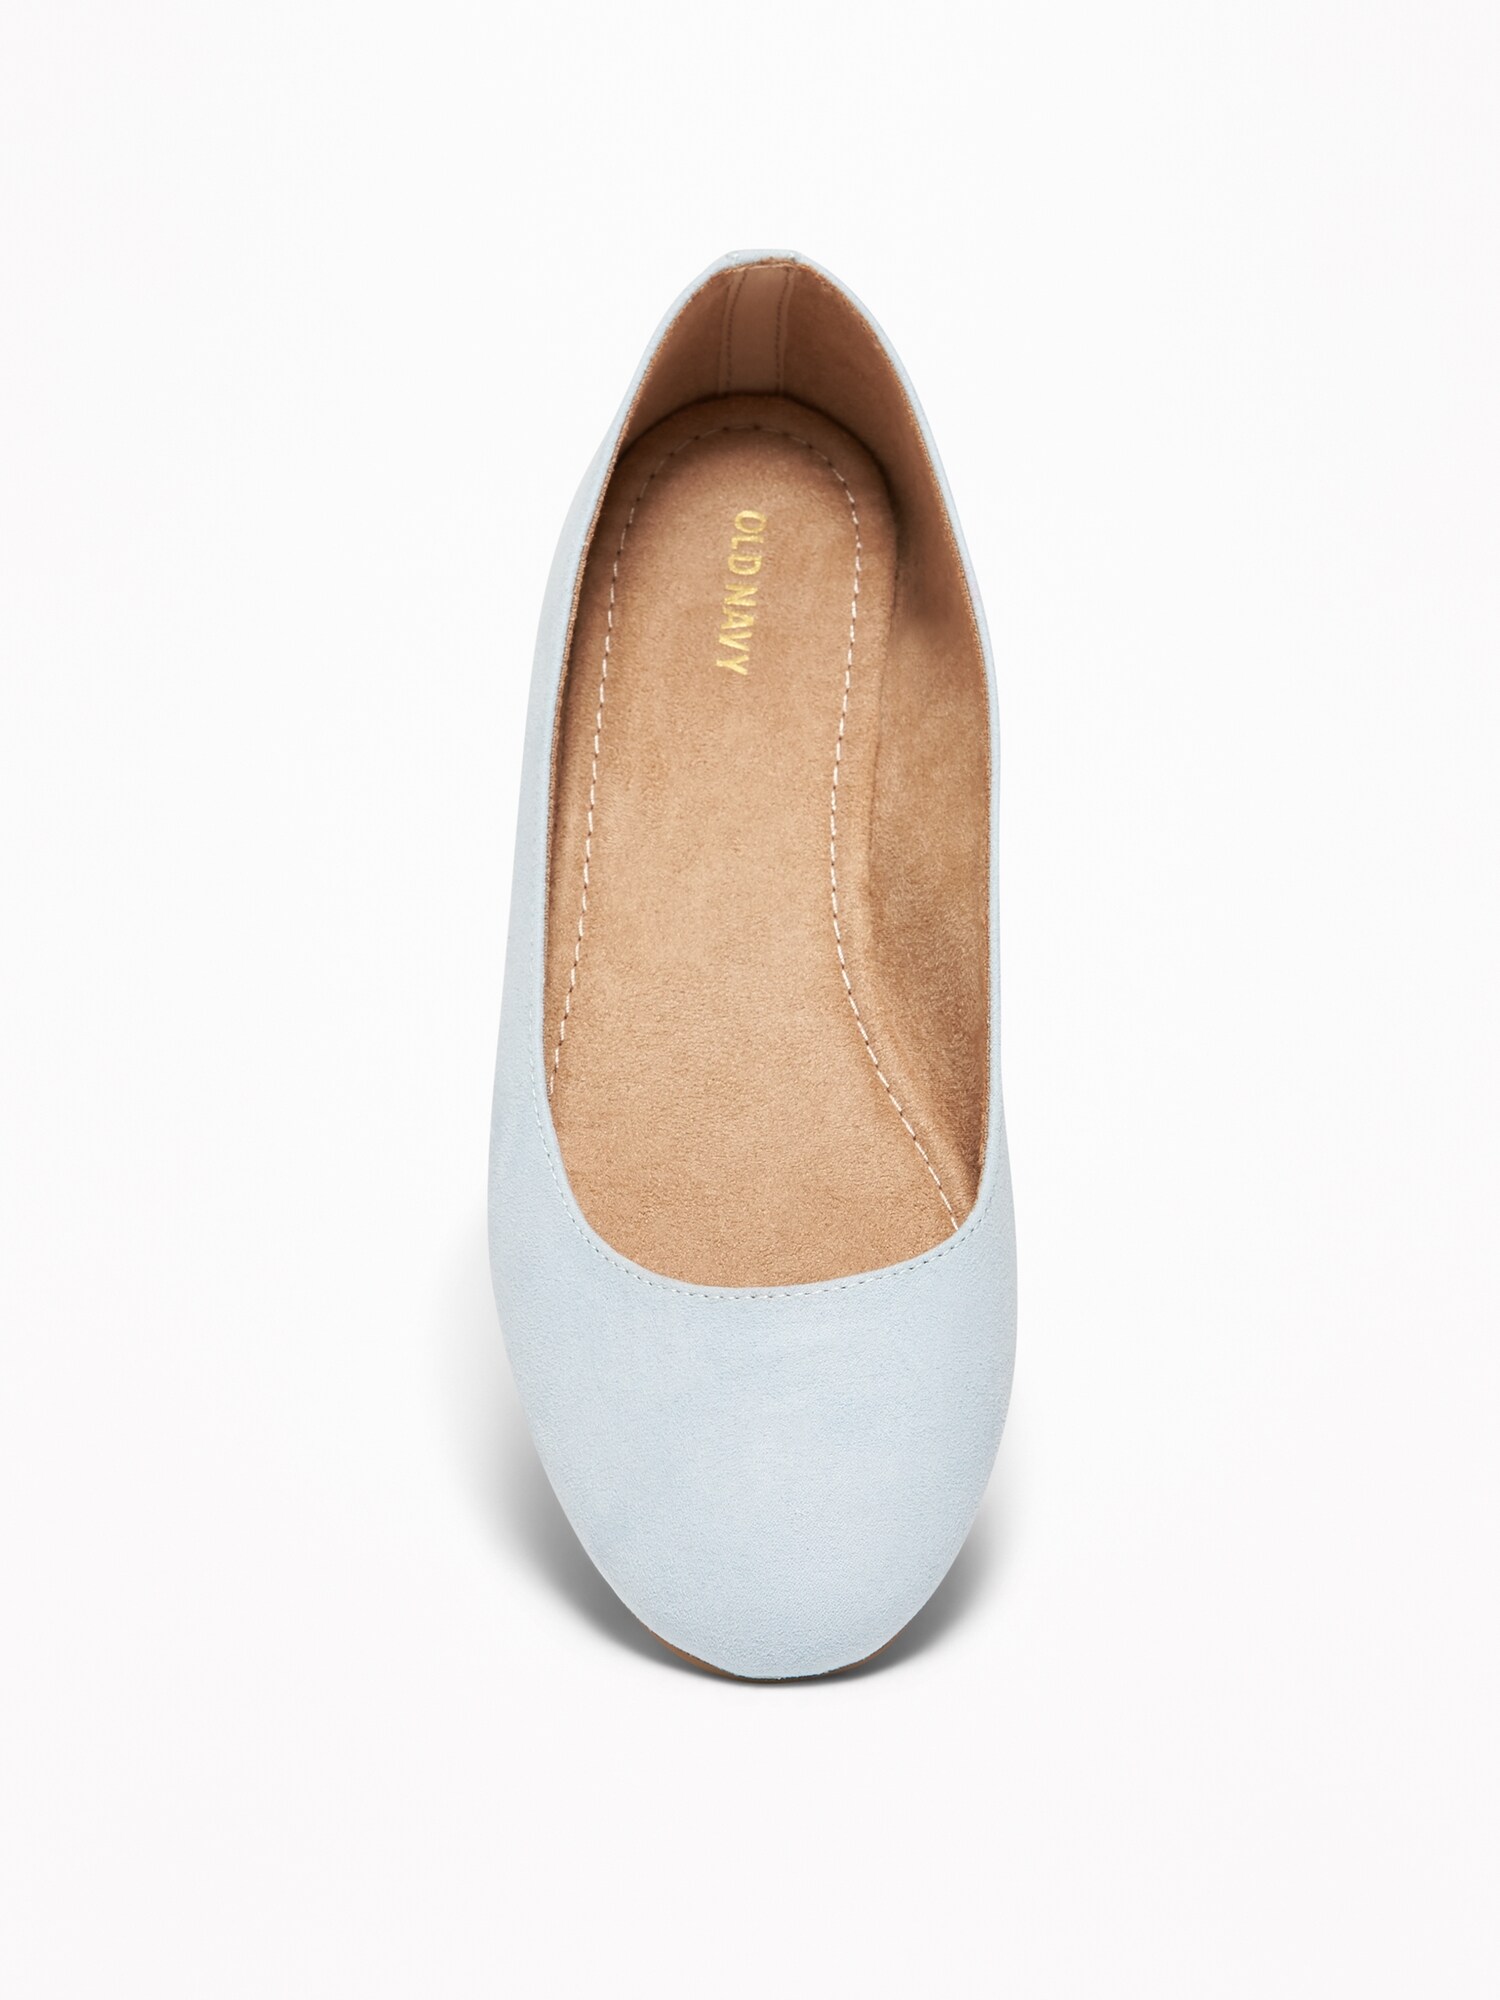 old navy flats shoes